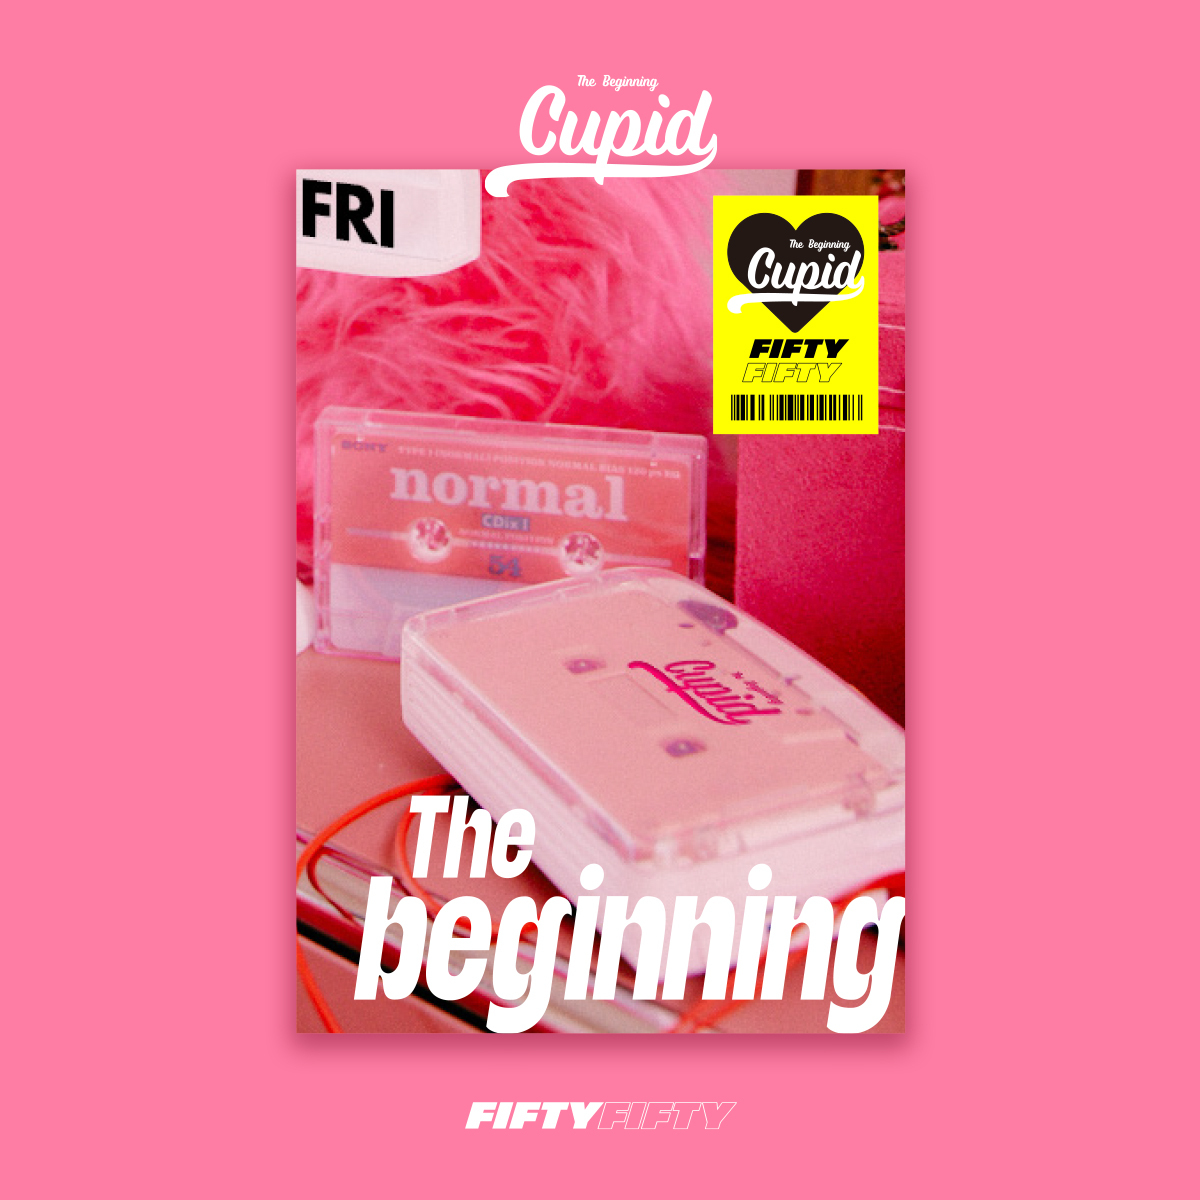 [Video Call Sign Event] FIFTY FIFTY - The 1st Single Album [The Beginning: Cupid] (NERD Ver.)